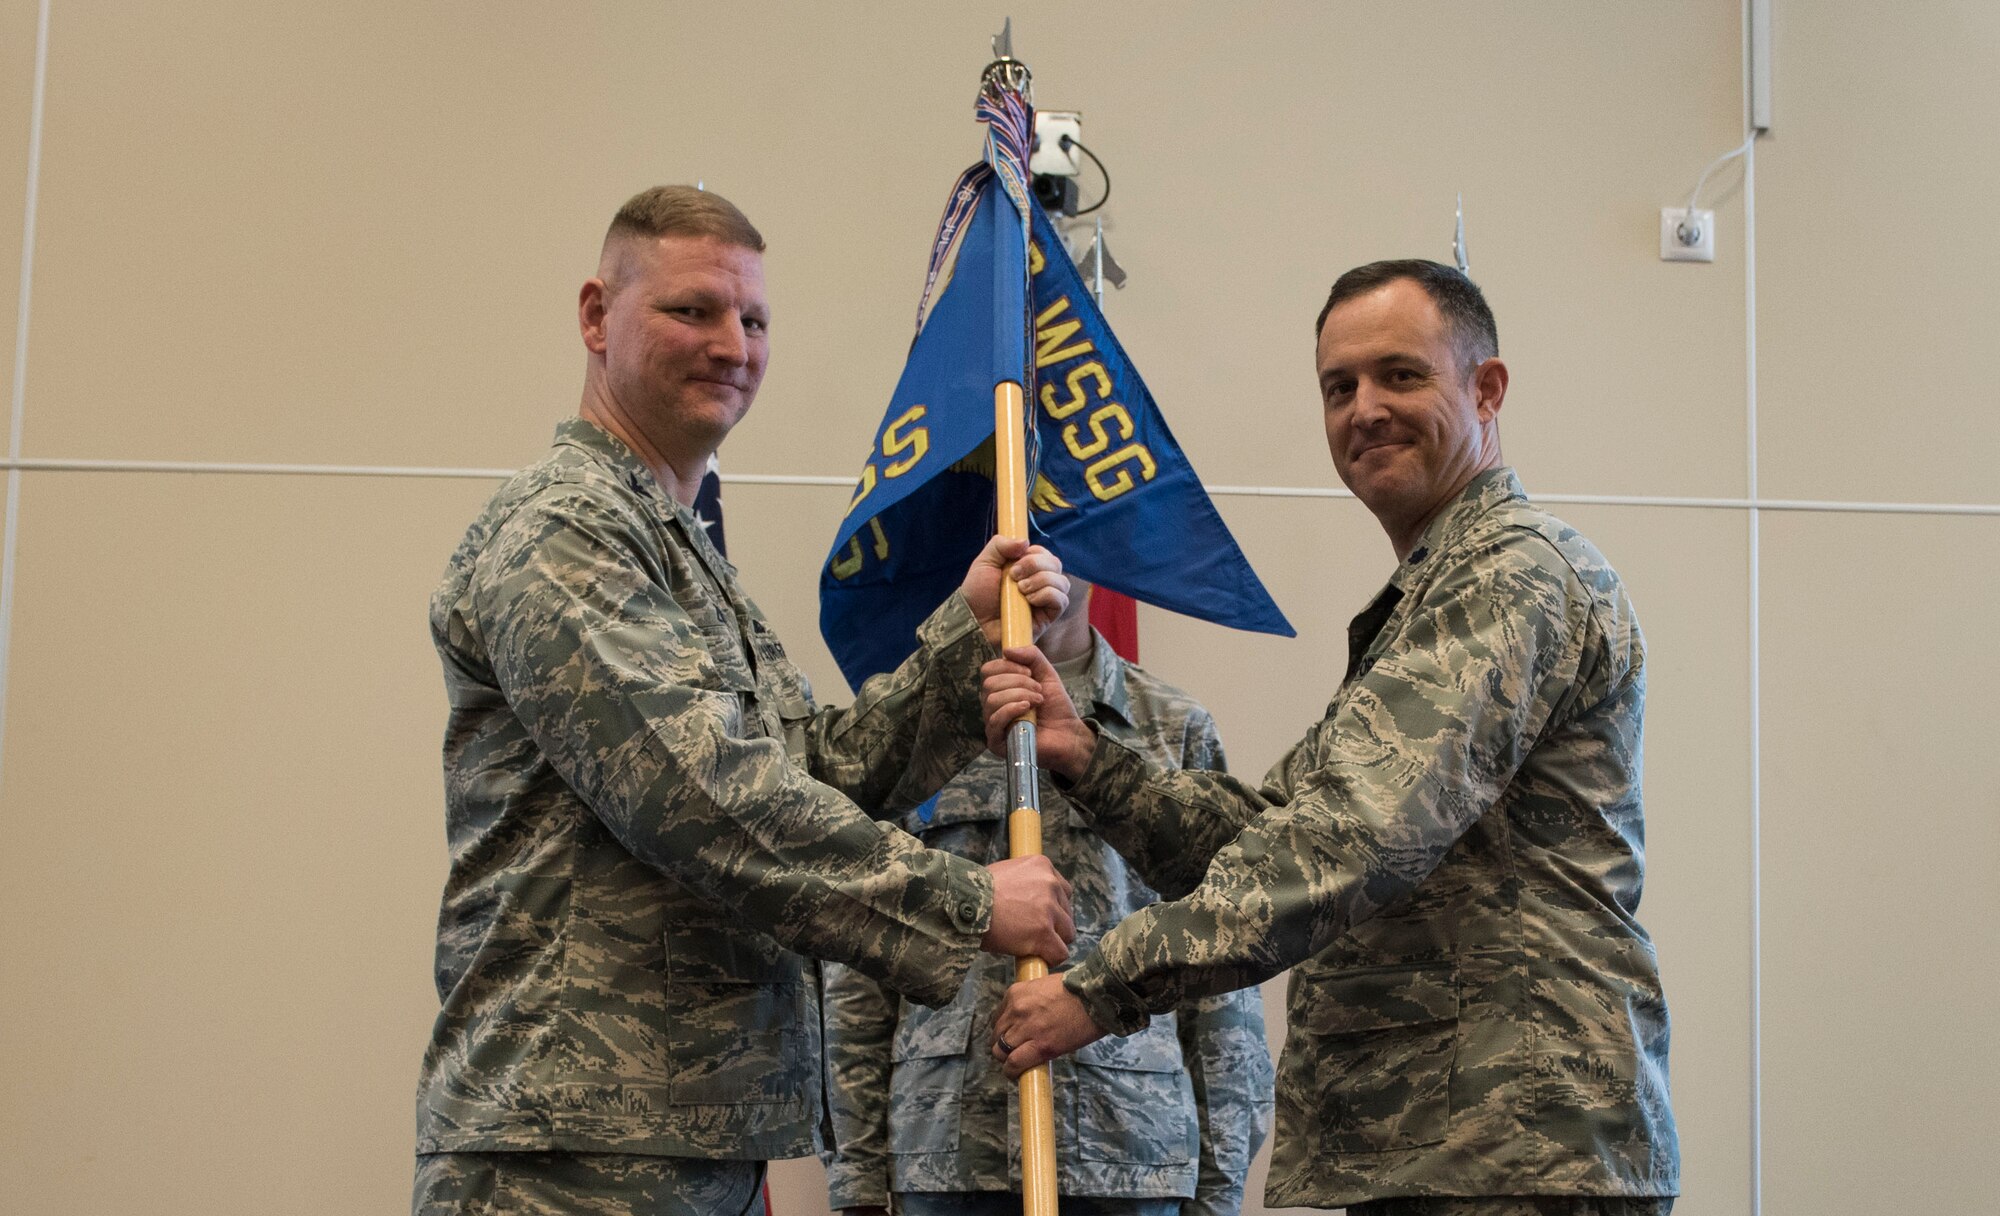 U.S. Air Force Lt. Col. Richard Swengros (right), 39th Operations Support Squadron incoming commander, assumes command of the 39th OSS from Col. James Zirkel, 39th Weapons System Security Group commander, during a change of command ceremony, June 1, 2017, at Incirlik Air Base, Turkey. The 39th OSS leads airfield and support operations to support U.S., and coalition forces operating here. (U.S. Air Force photo by Airman 1st Class Kristan Campbell)